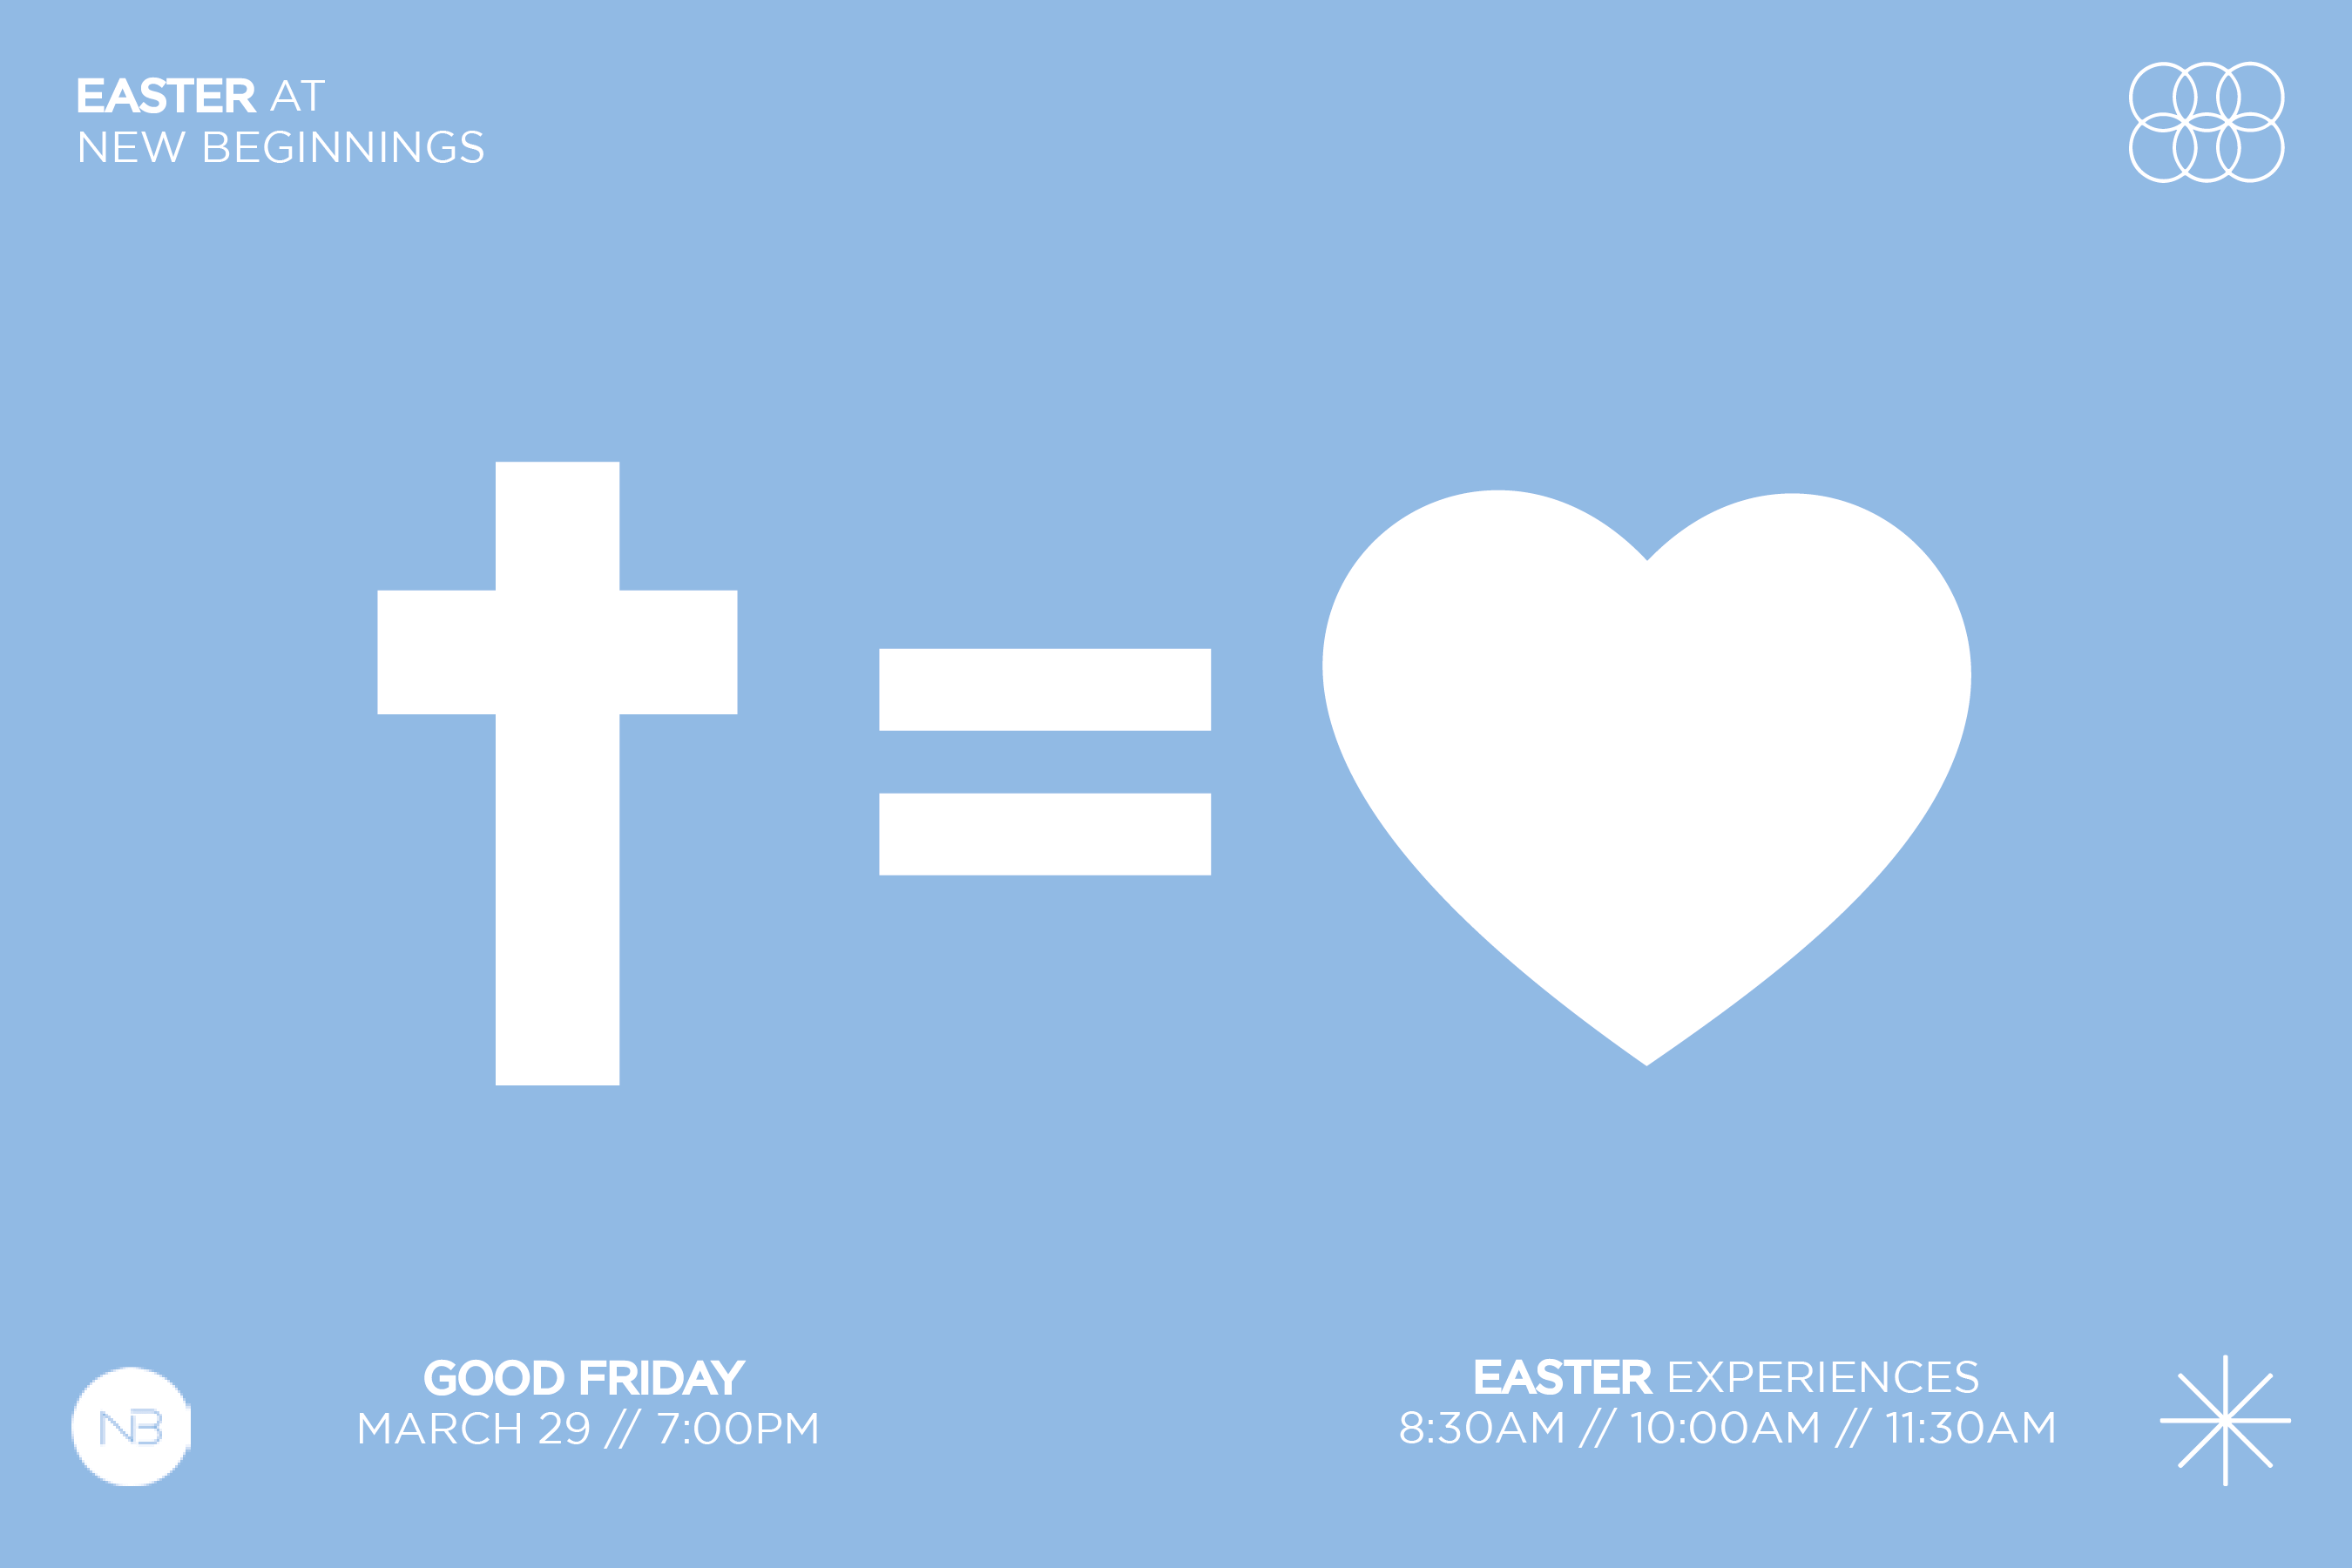 a graphic of cross equals love, good firday service mar 29 at 7pm, easter services at 8:30, 10 and 11:30am